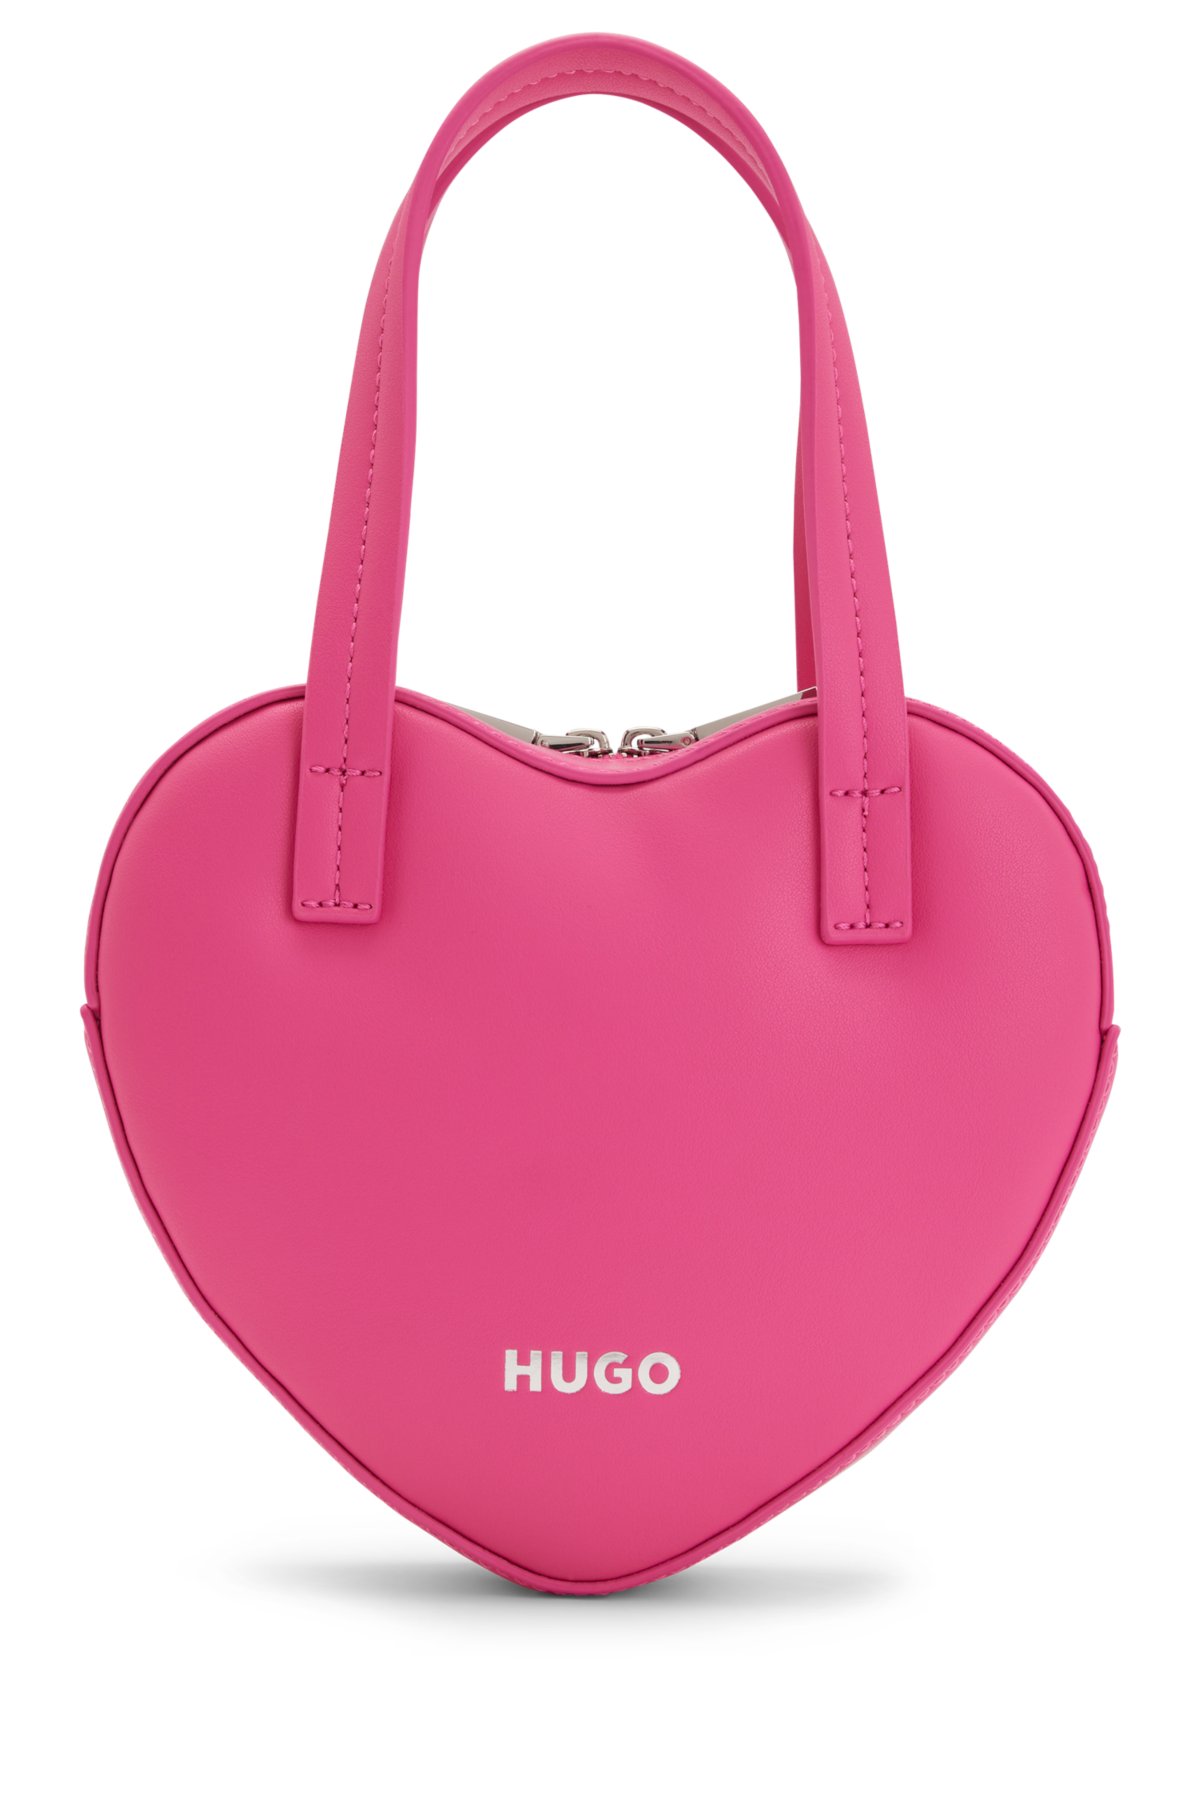 HUGO - Faux-leather heart-shaped bag with logo detail